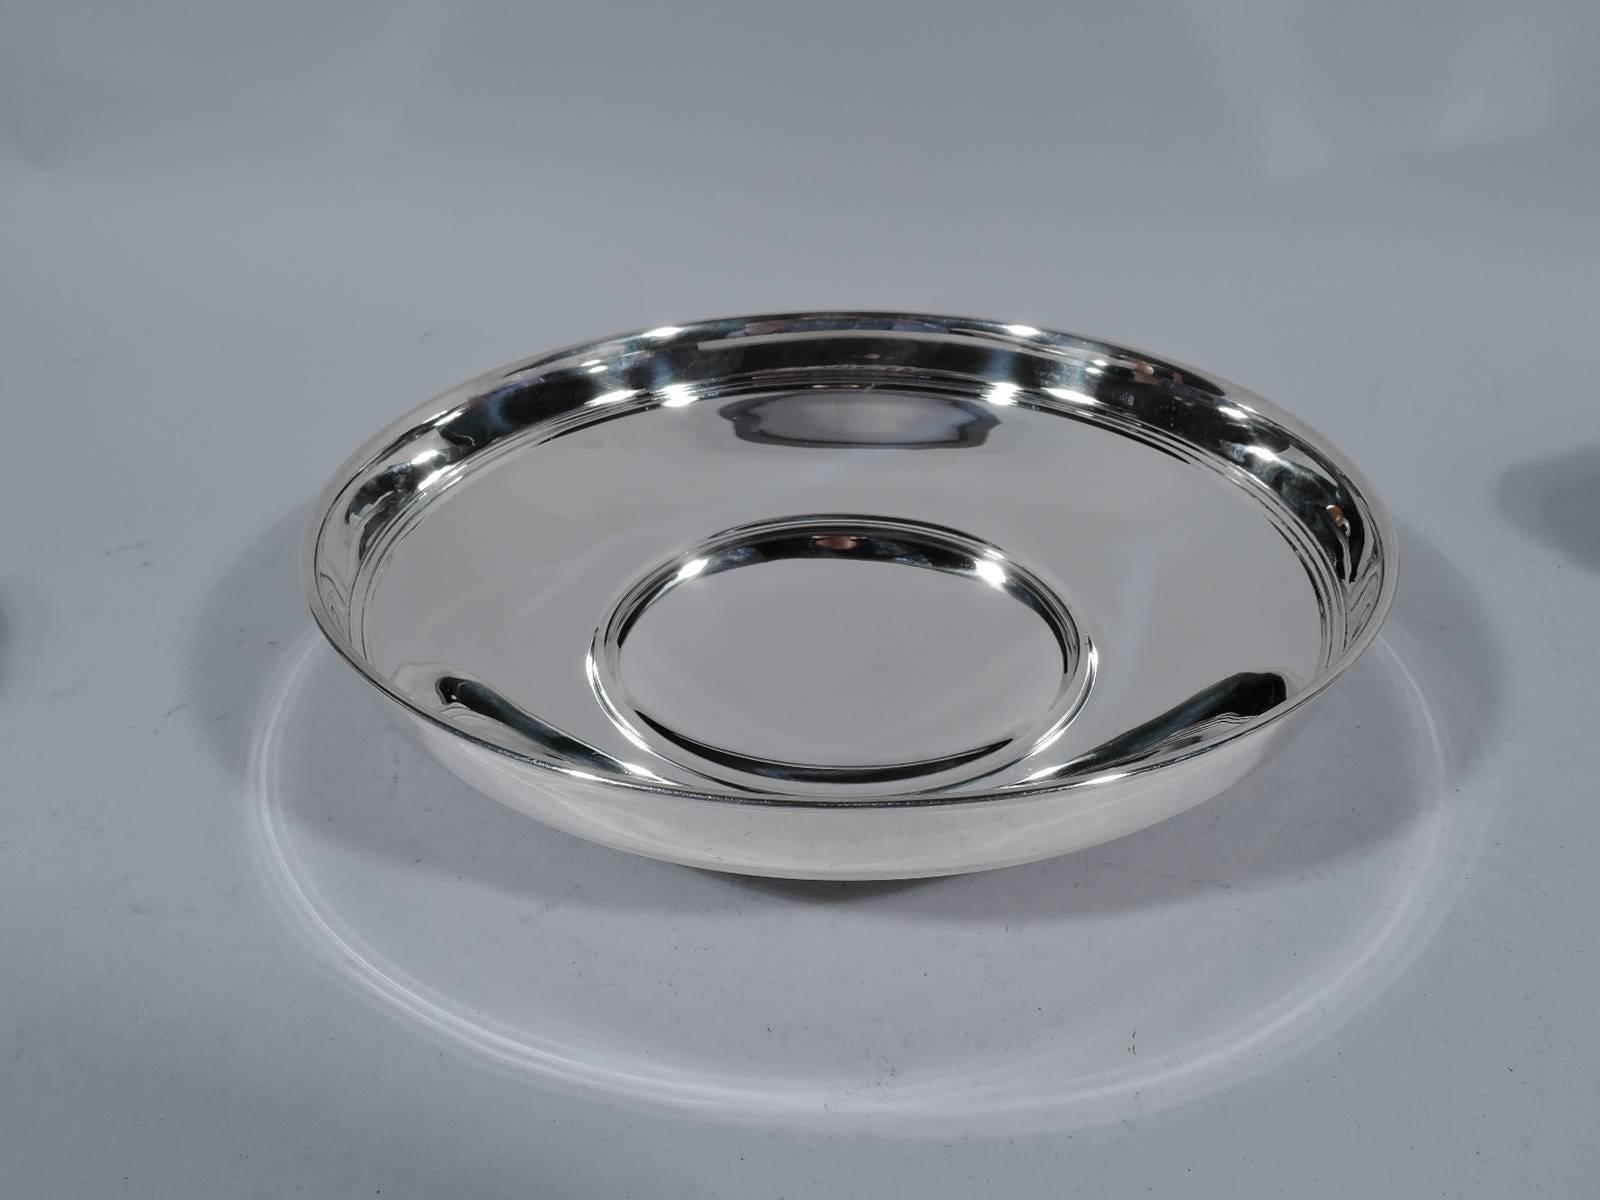 Sterling silver bowl. Made by Tiffany & Co. in New York, circa 1914. Round and shallow bowl with concave underside and straight sides with reeded band. Hallmark includes pattern no. 18720 and director’s letter ‘M’ (1907-1947). Very good